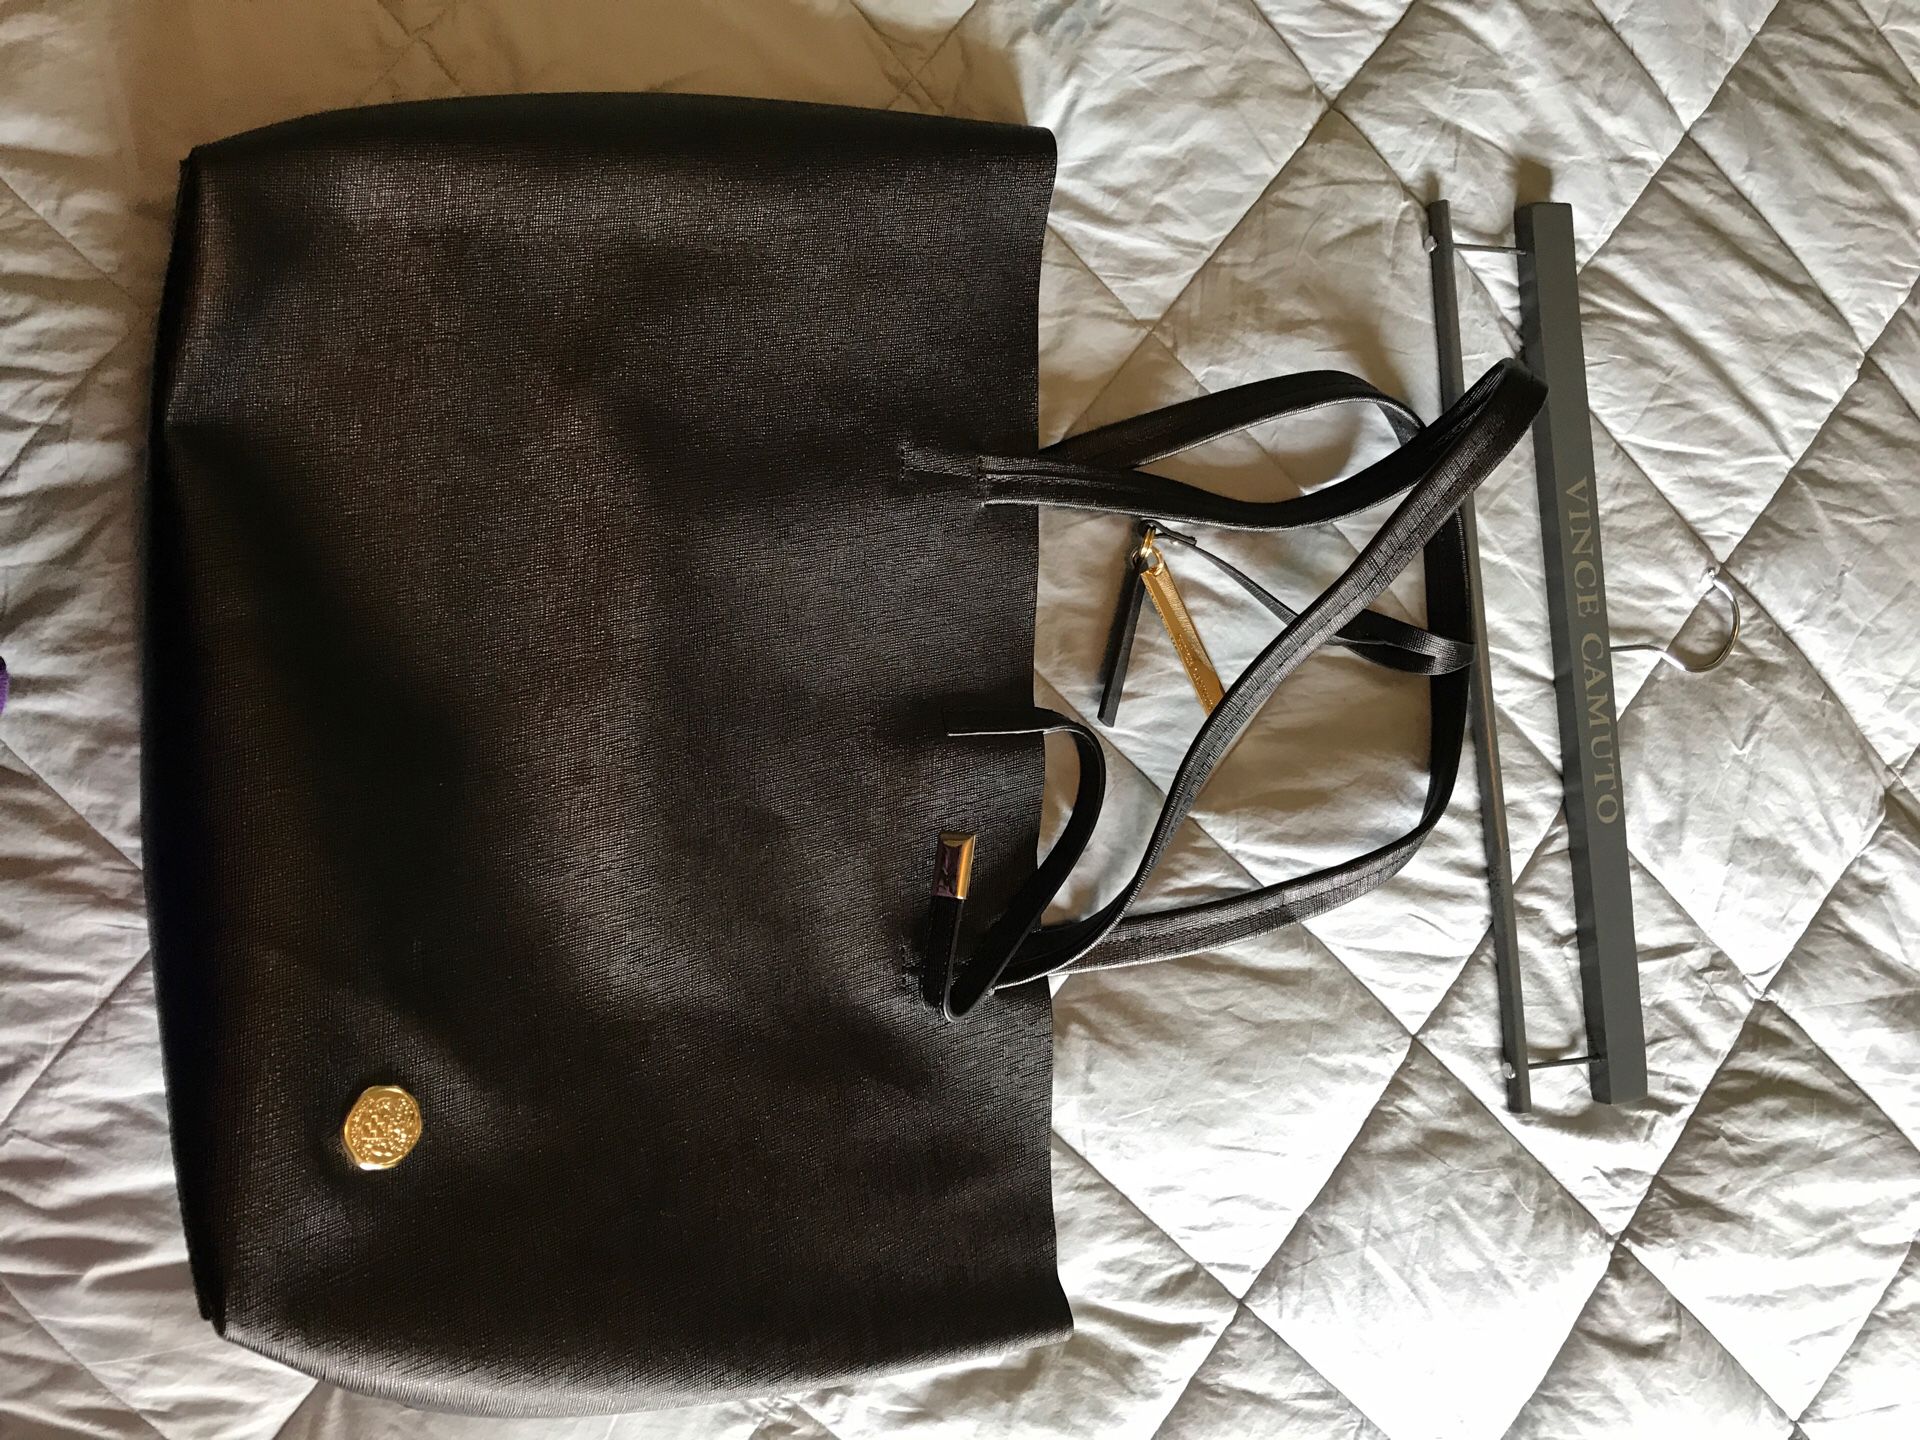 Black Vince Camuto Large Tote with travel bag